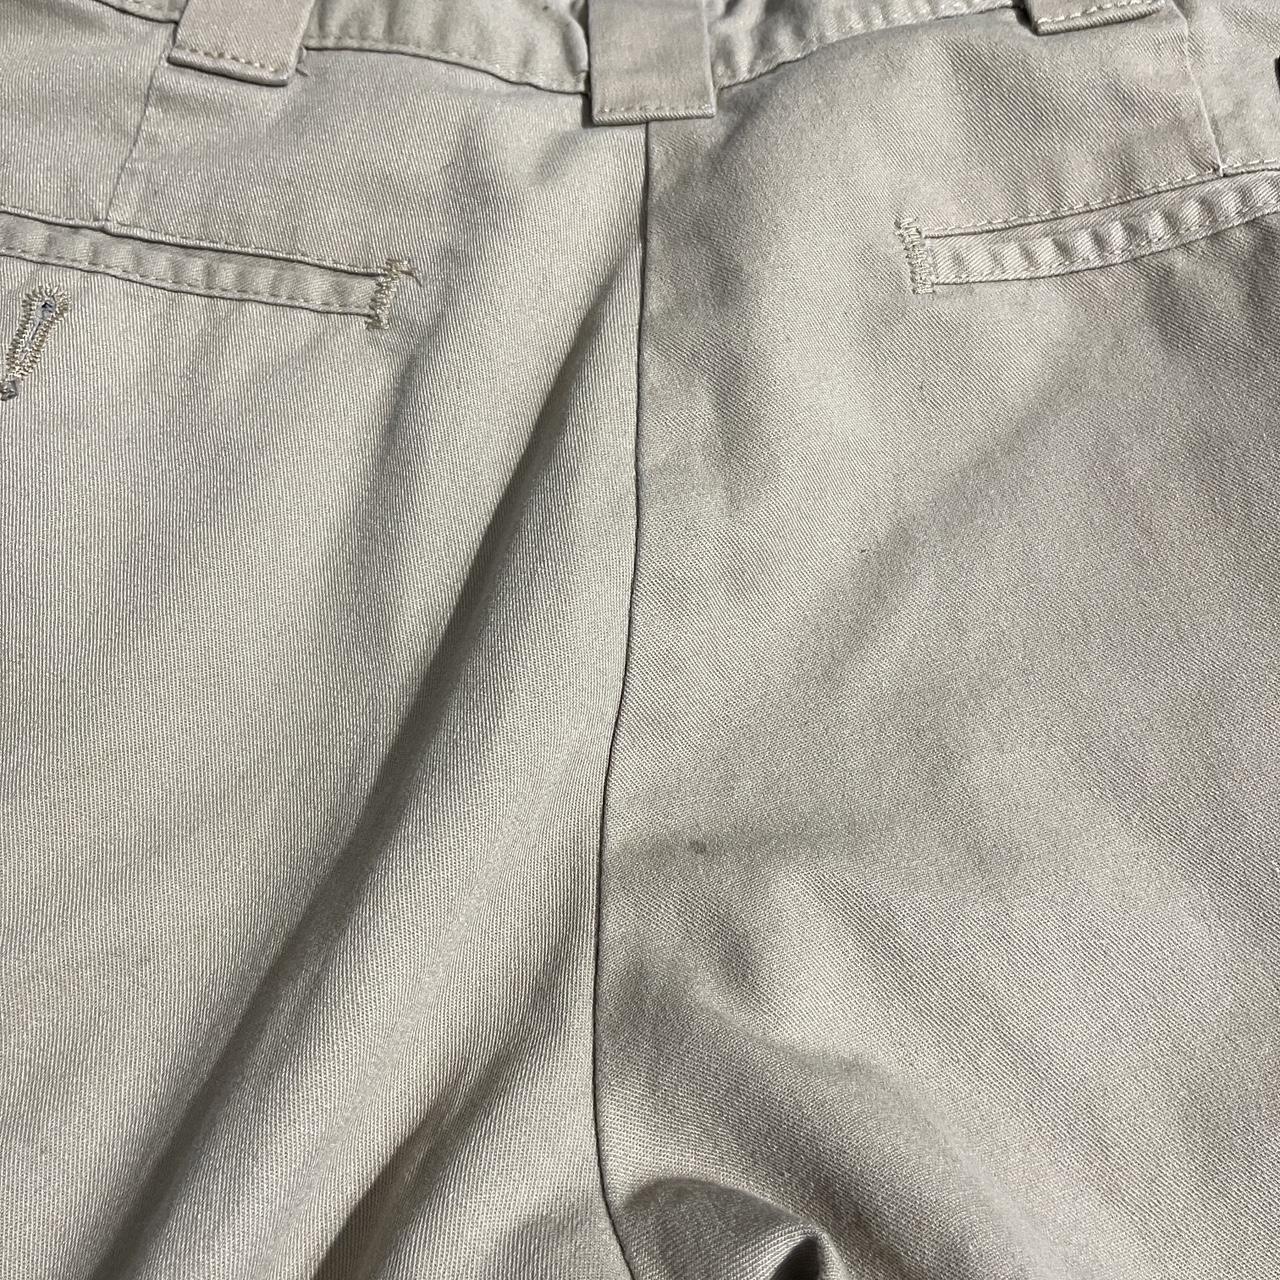 Dickies Cargo Pants sz 32x30 has holes and stains... - Depop